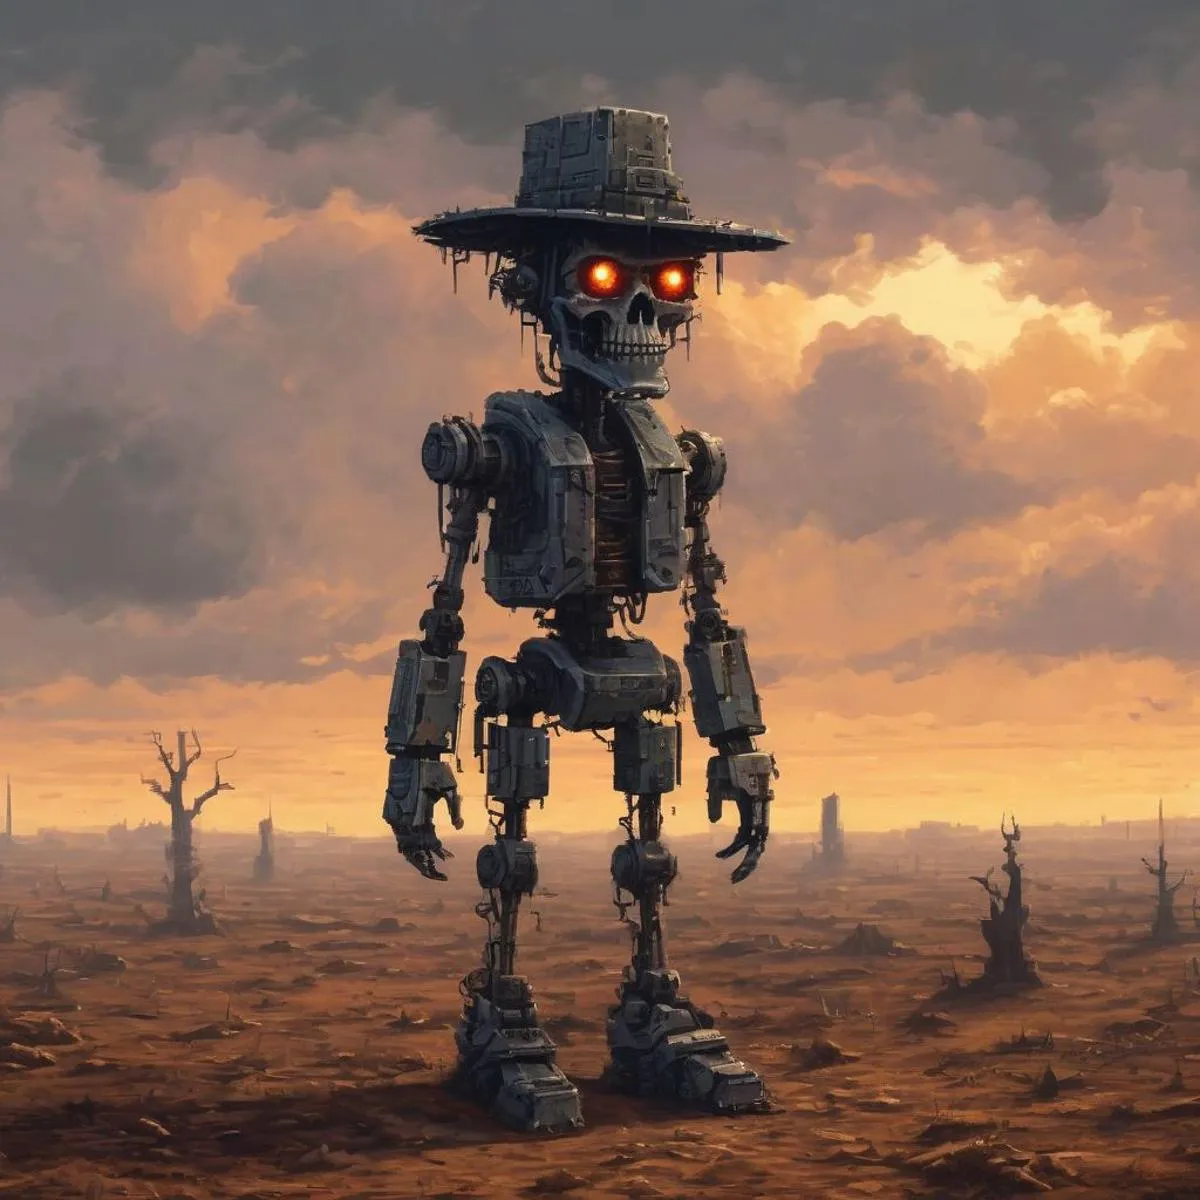 AI generated image using stable diffusion of a robotic cowboy with glowing red eyes in a barren, post-apocalyptic landscape with a cloudy sky.